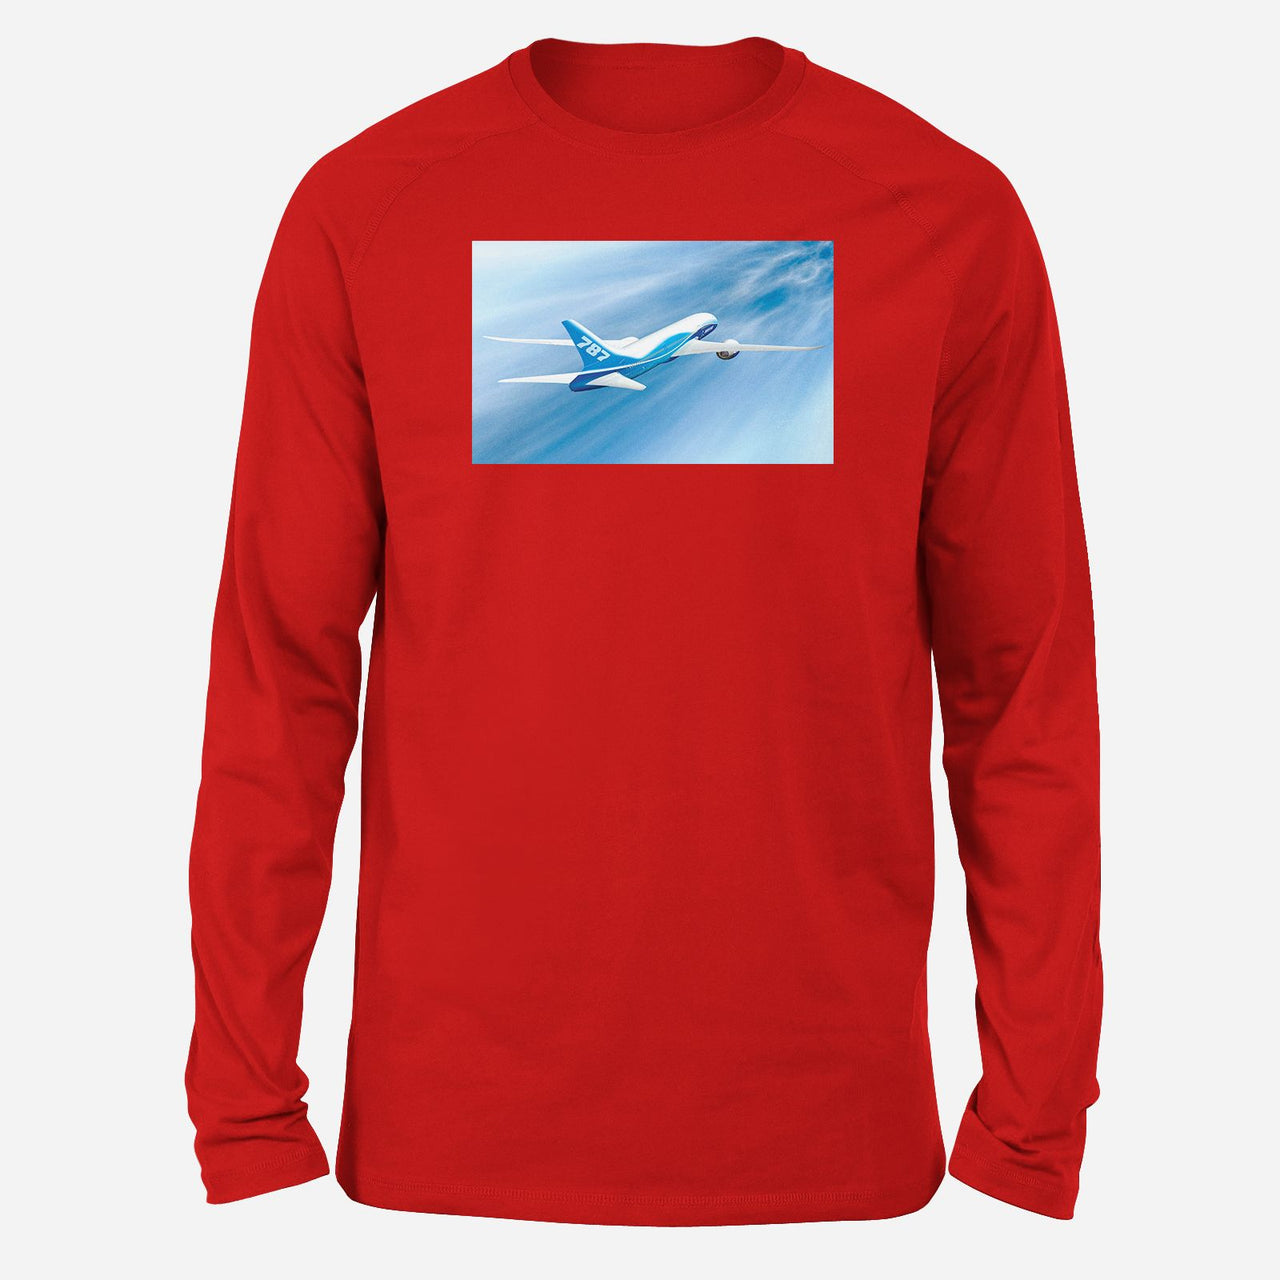 Beautiful Painting of Boeing 787 Dreamliner Designed Long-Sleeve T-Shirts